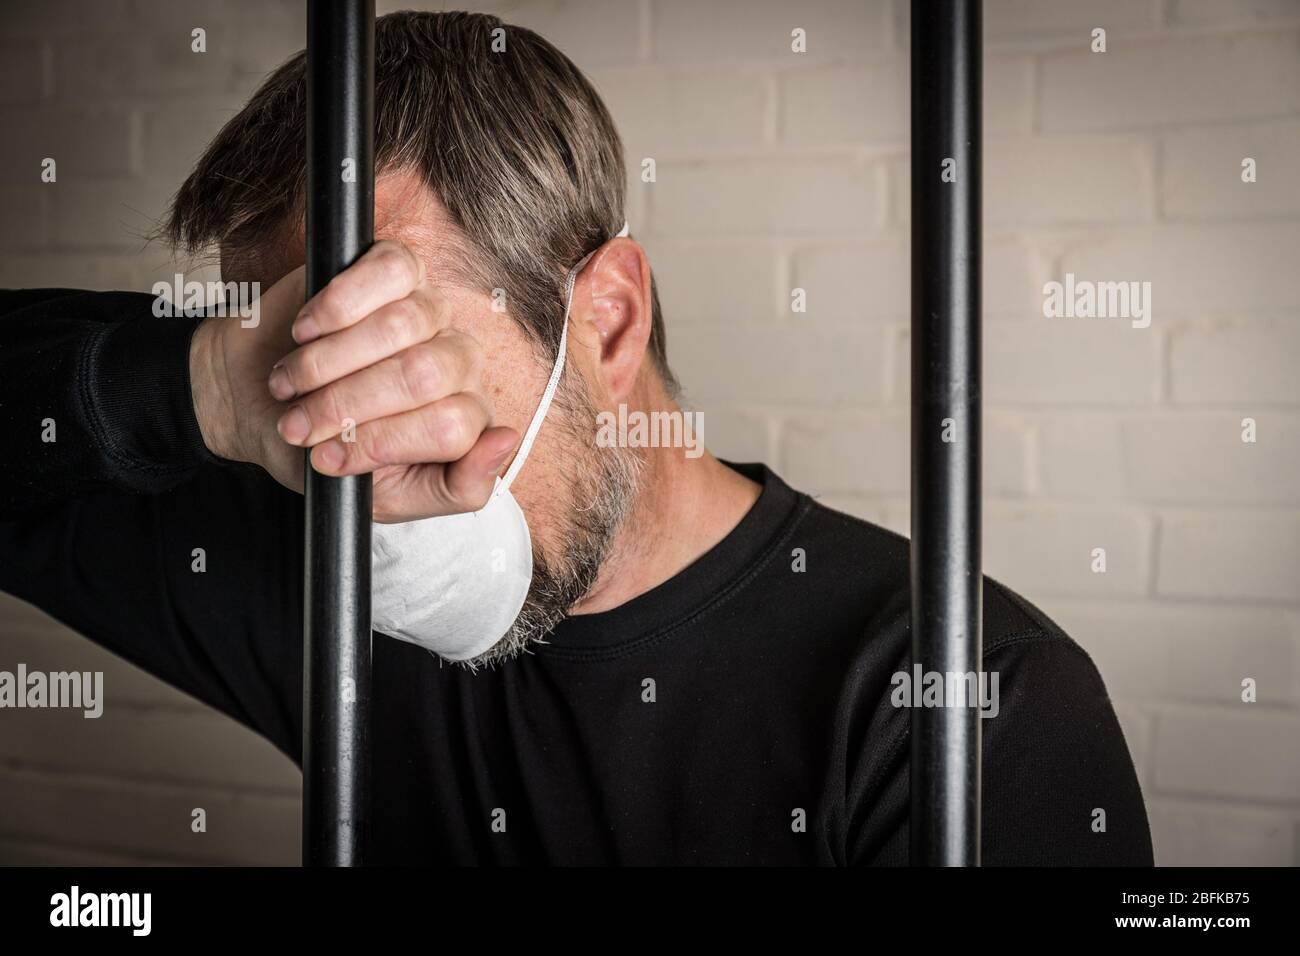 A prisoner behind bars wearing a face mask to illustrate Coronavirus and Covid 19 issues in prison. Photo posed by model. Stock Photo